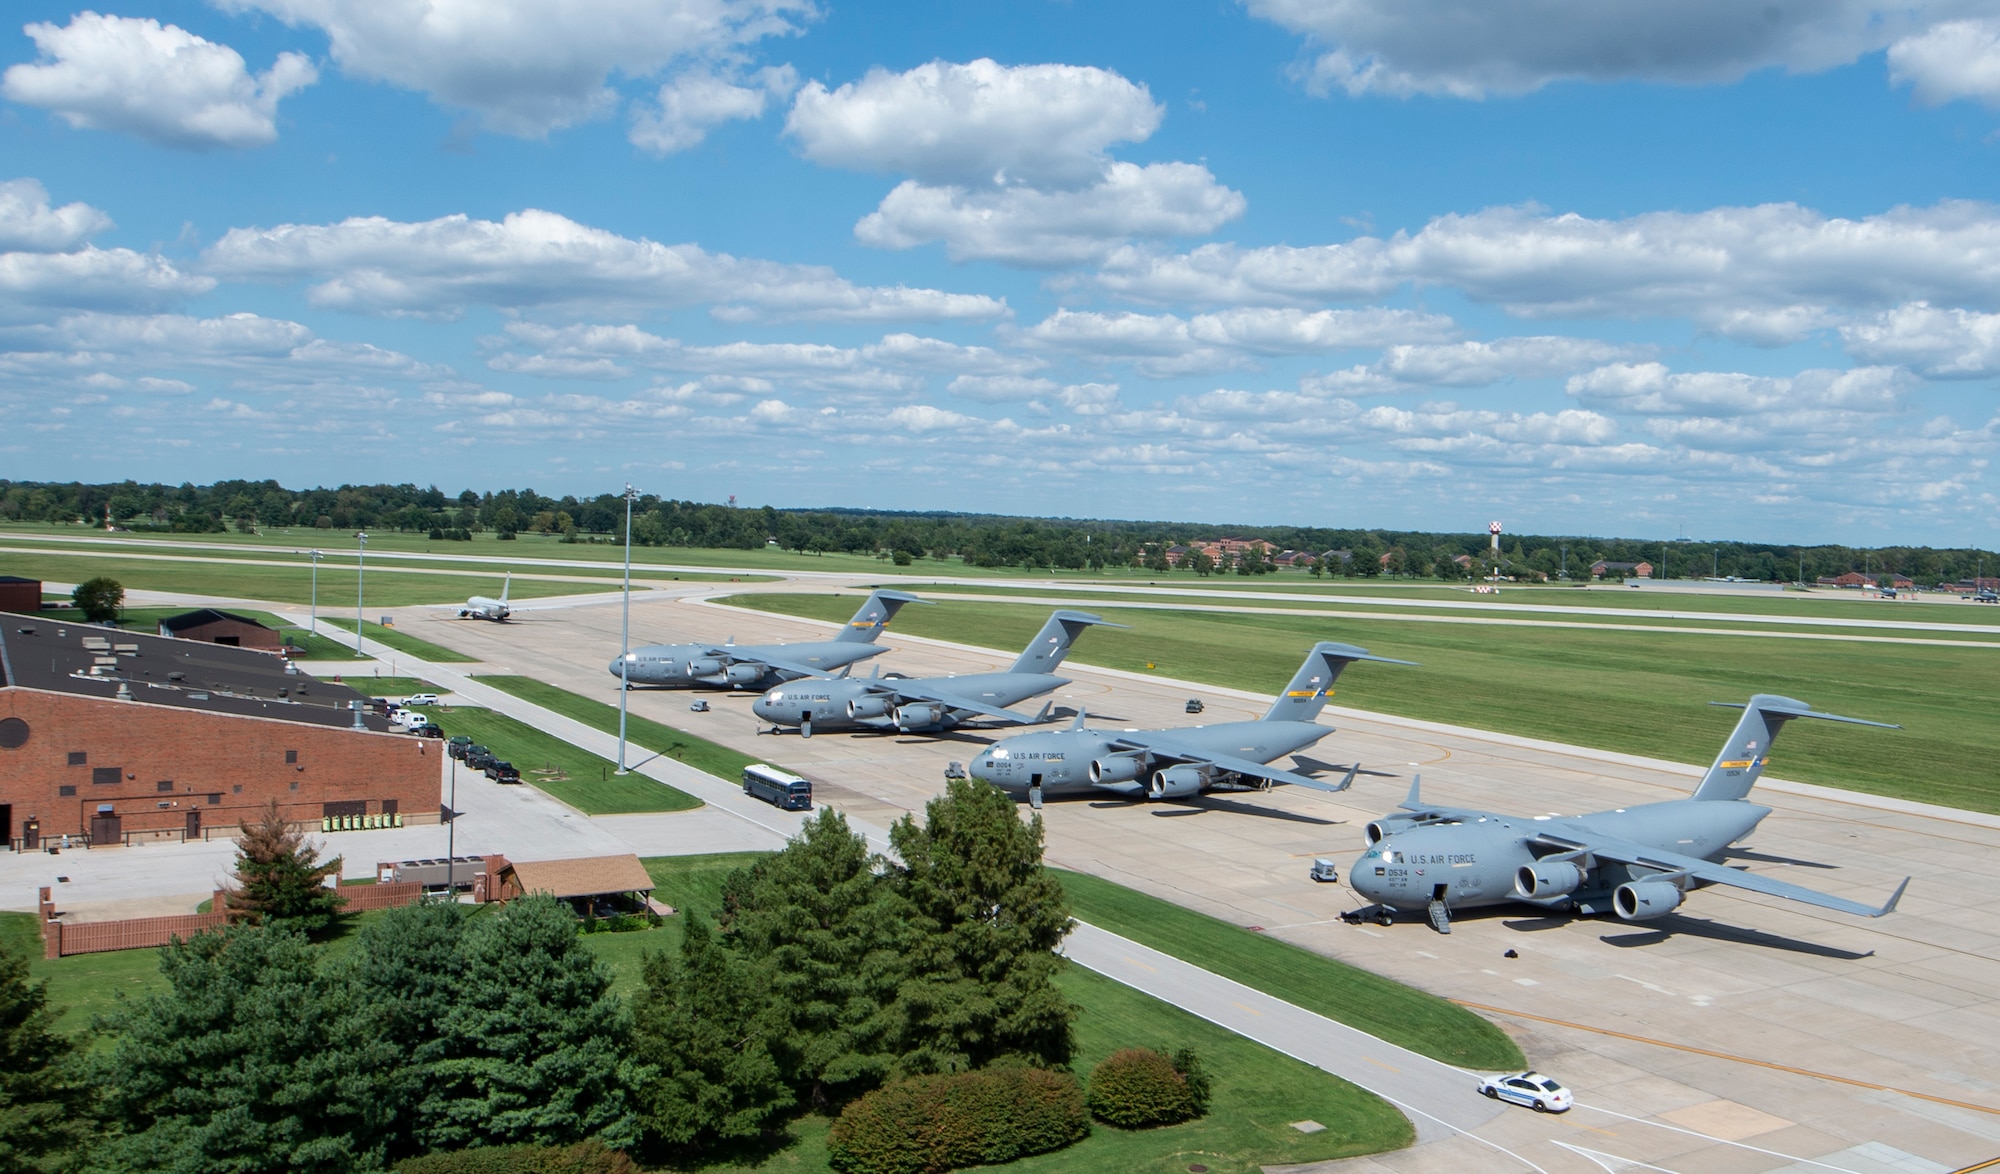 Scott Air Force Base and Mid-America Airport hosted multiple C-17 Globemaster III aircraft that evacuated Joint Base Charleston, South Carolina in preparation for Hurricane Florence, Sept. 11, 2018. More than 1 million people were ordered to evacuate Virginia, North Carolina and South Carolina as the East Coast braces itself for the Category 4 storm.